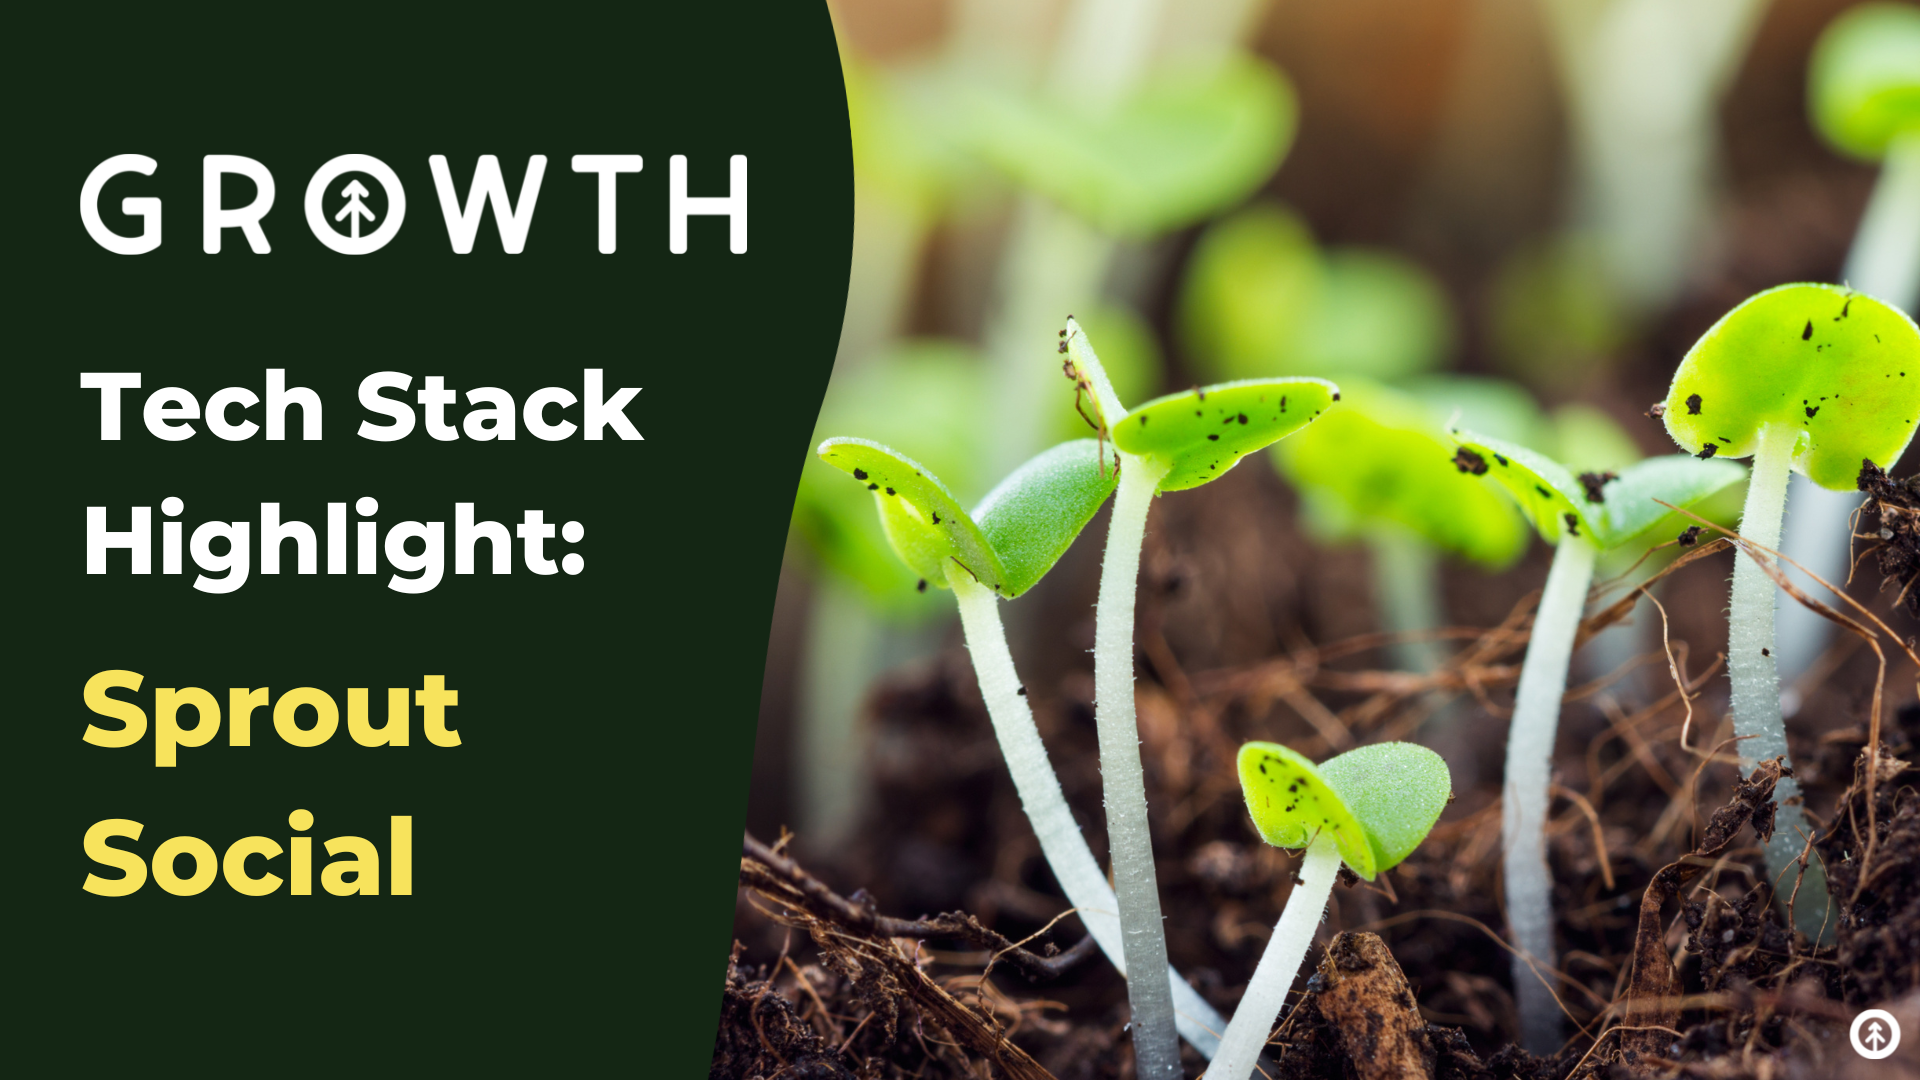 Growth Tech Stack Highlight: Sprout Social